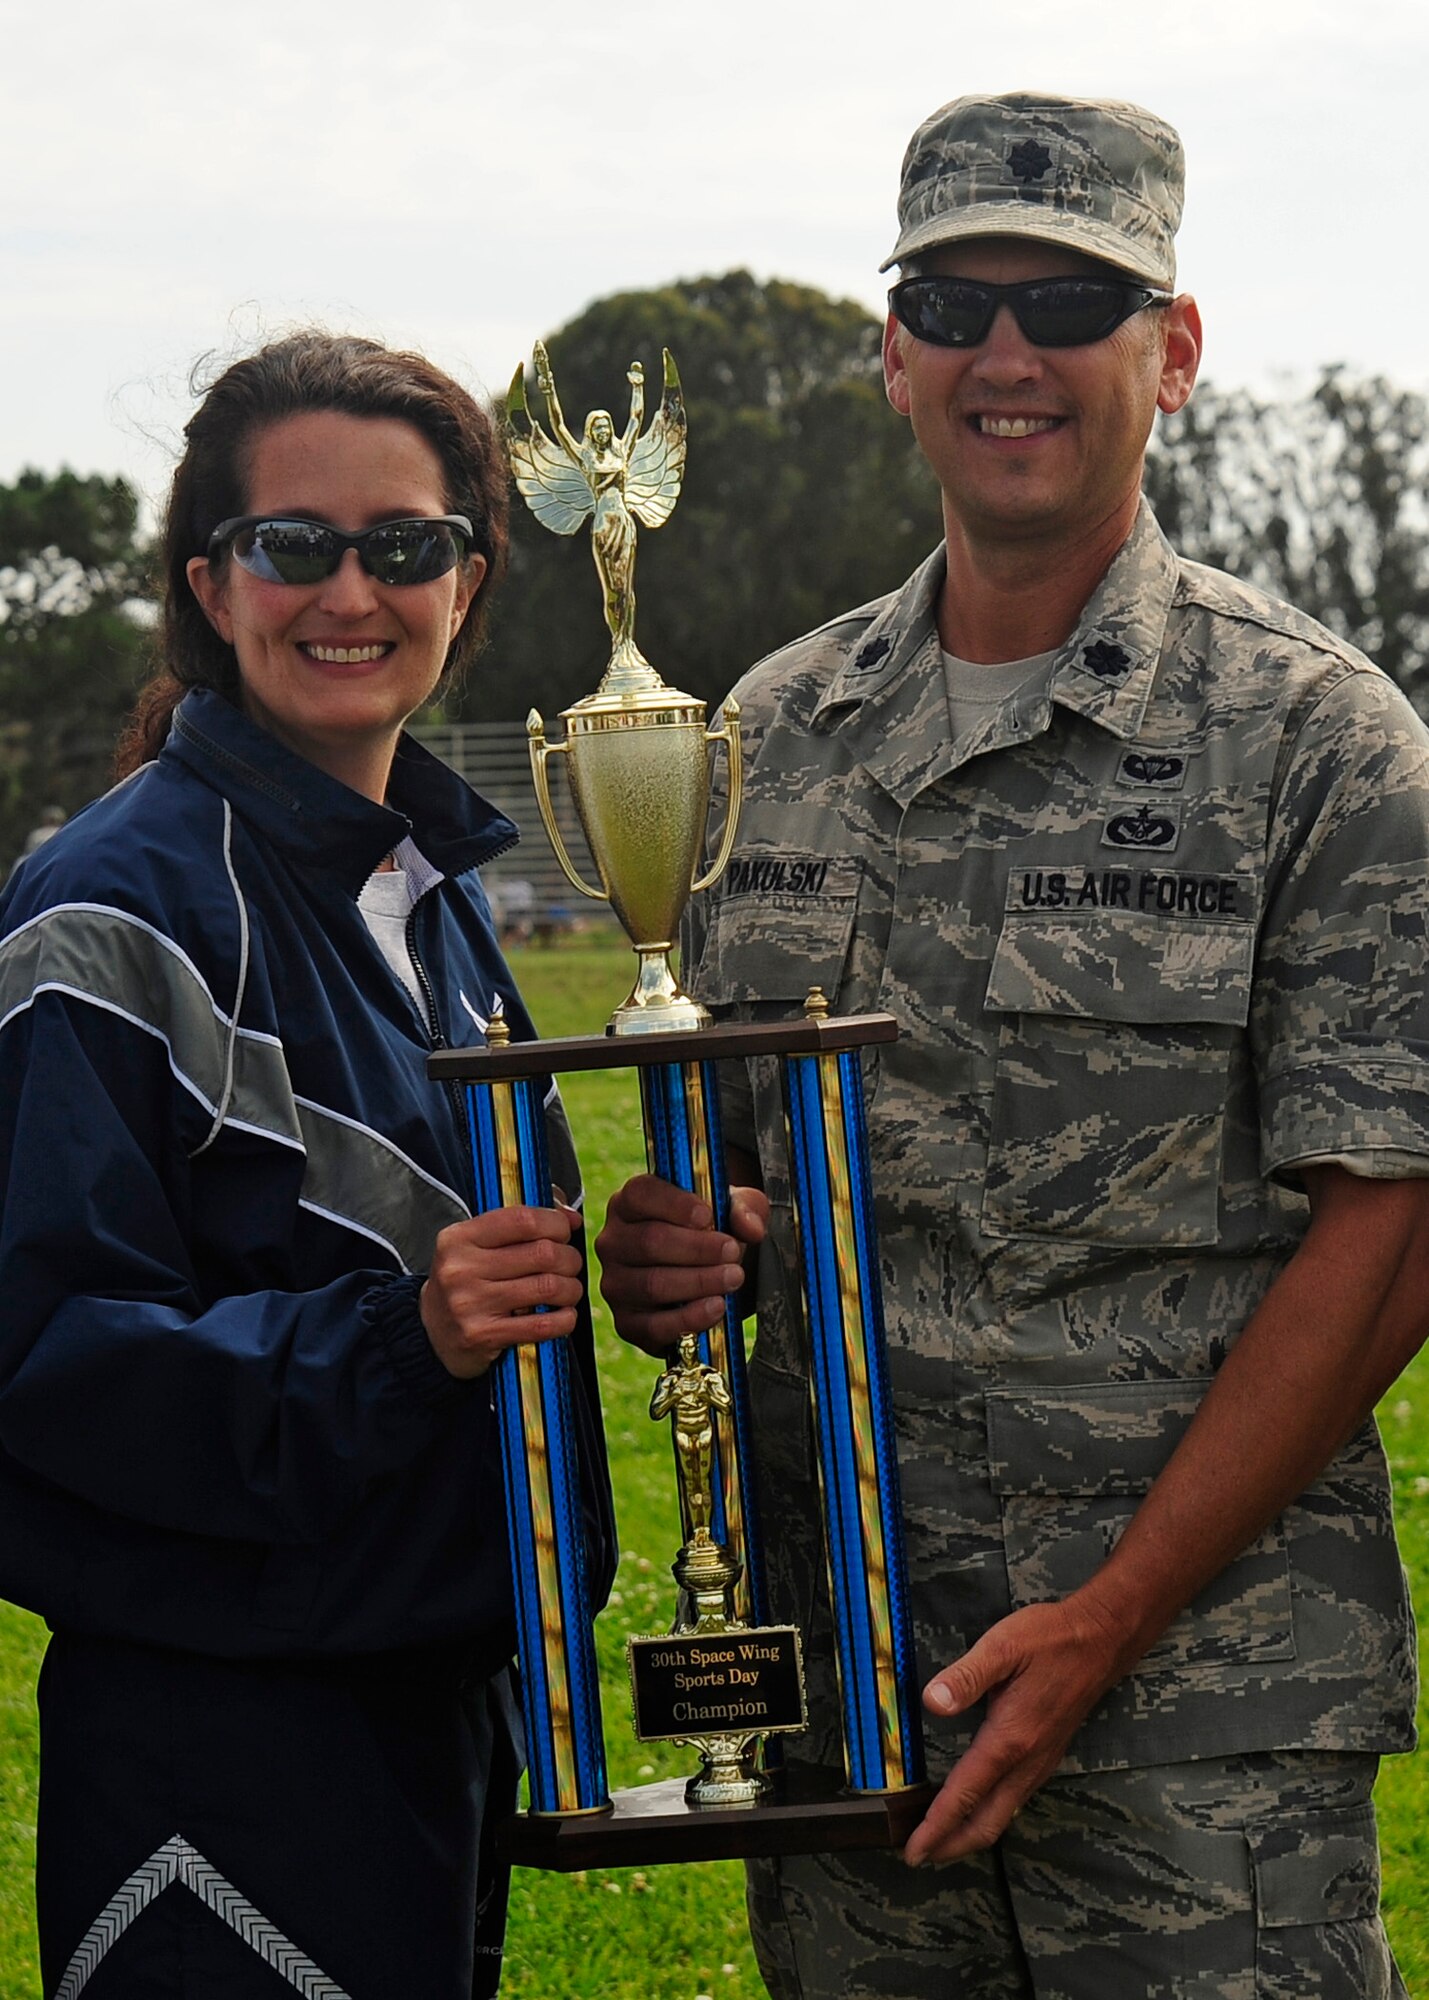 VANDENBERG AIR FORCE BASE, Calif. -- Col. Nina Armagno, 30th Space Wing Commander, awards Lt. Col. Dennis Pakulski, acting 30th Civil Engineer Squadron commander, with the first place trophy during the sports day closing ceremony here Friday, August 17, 2012. Sports day is organized by the 30th Force Support Squadron Fitness Center staff and offers squadrons and organizational teams a chance to compete in a variety of sporting events throughout the day. (U.S. Air Force photo/Michael Peterson)